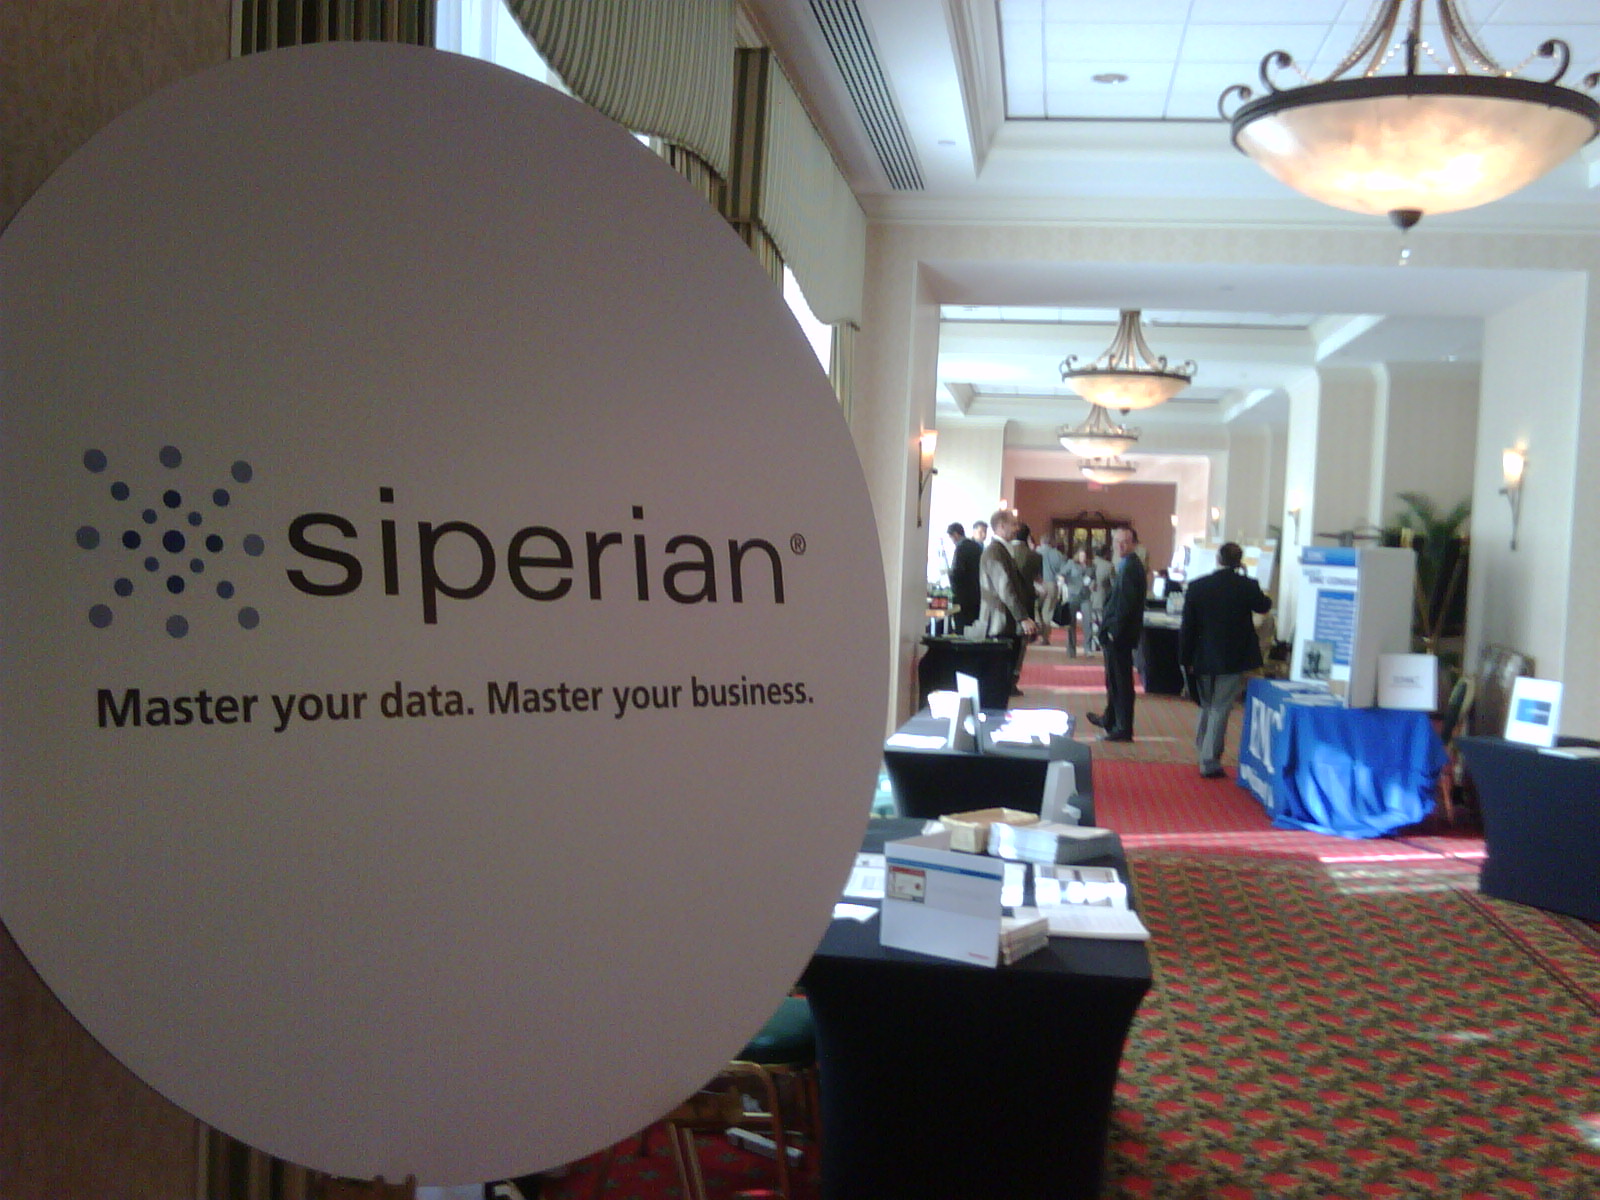 Registration Area for the Siperian Masters 2008 held at the Bridgwater Marriott